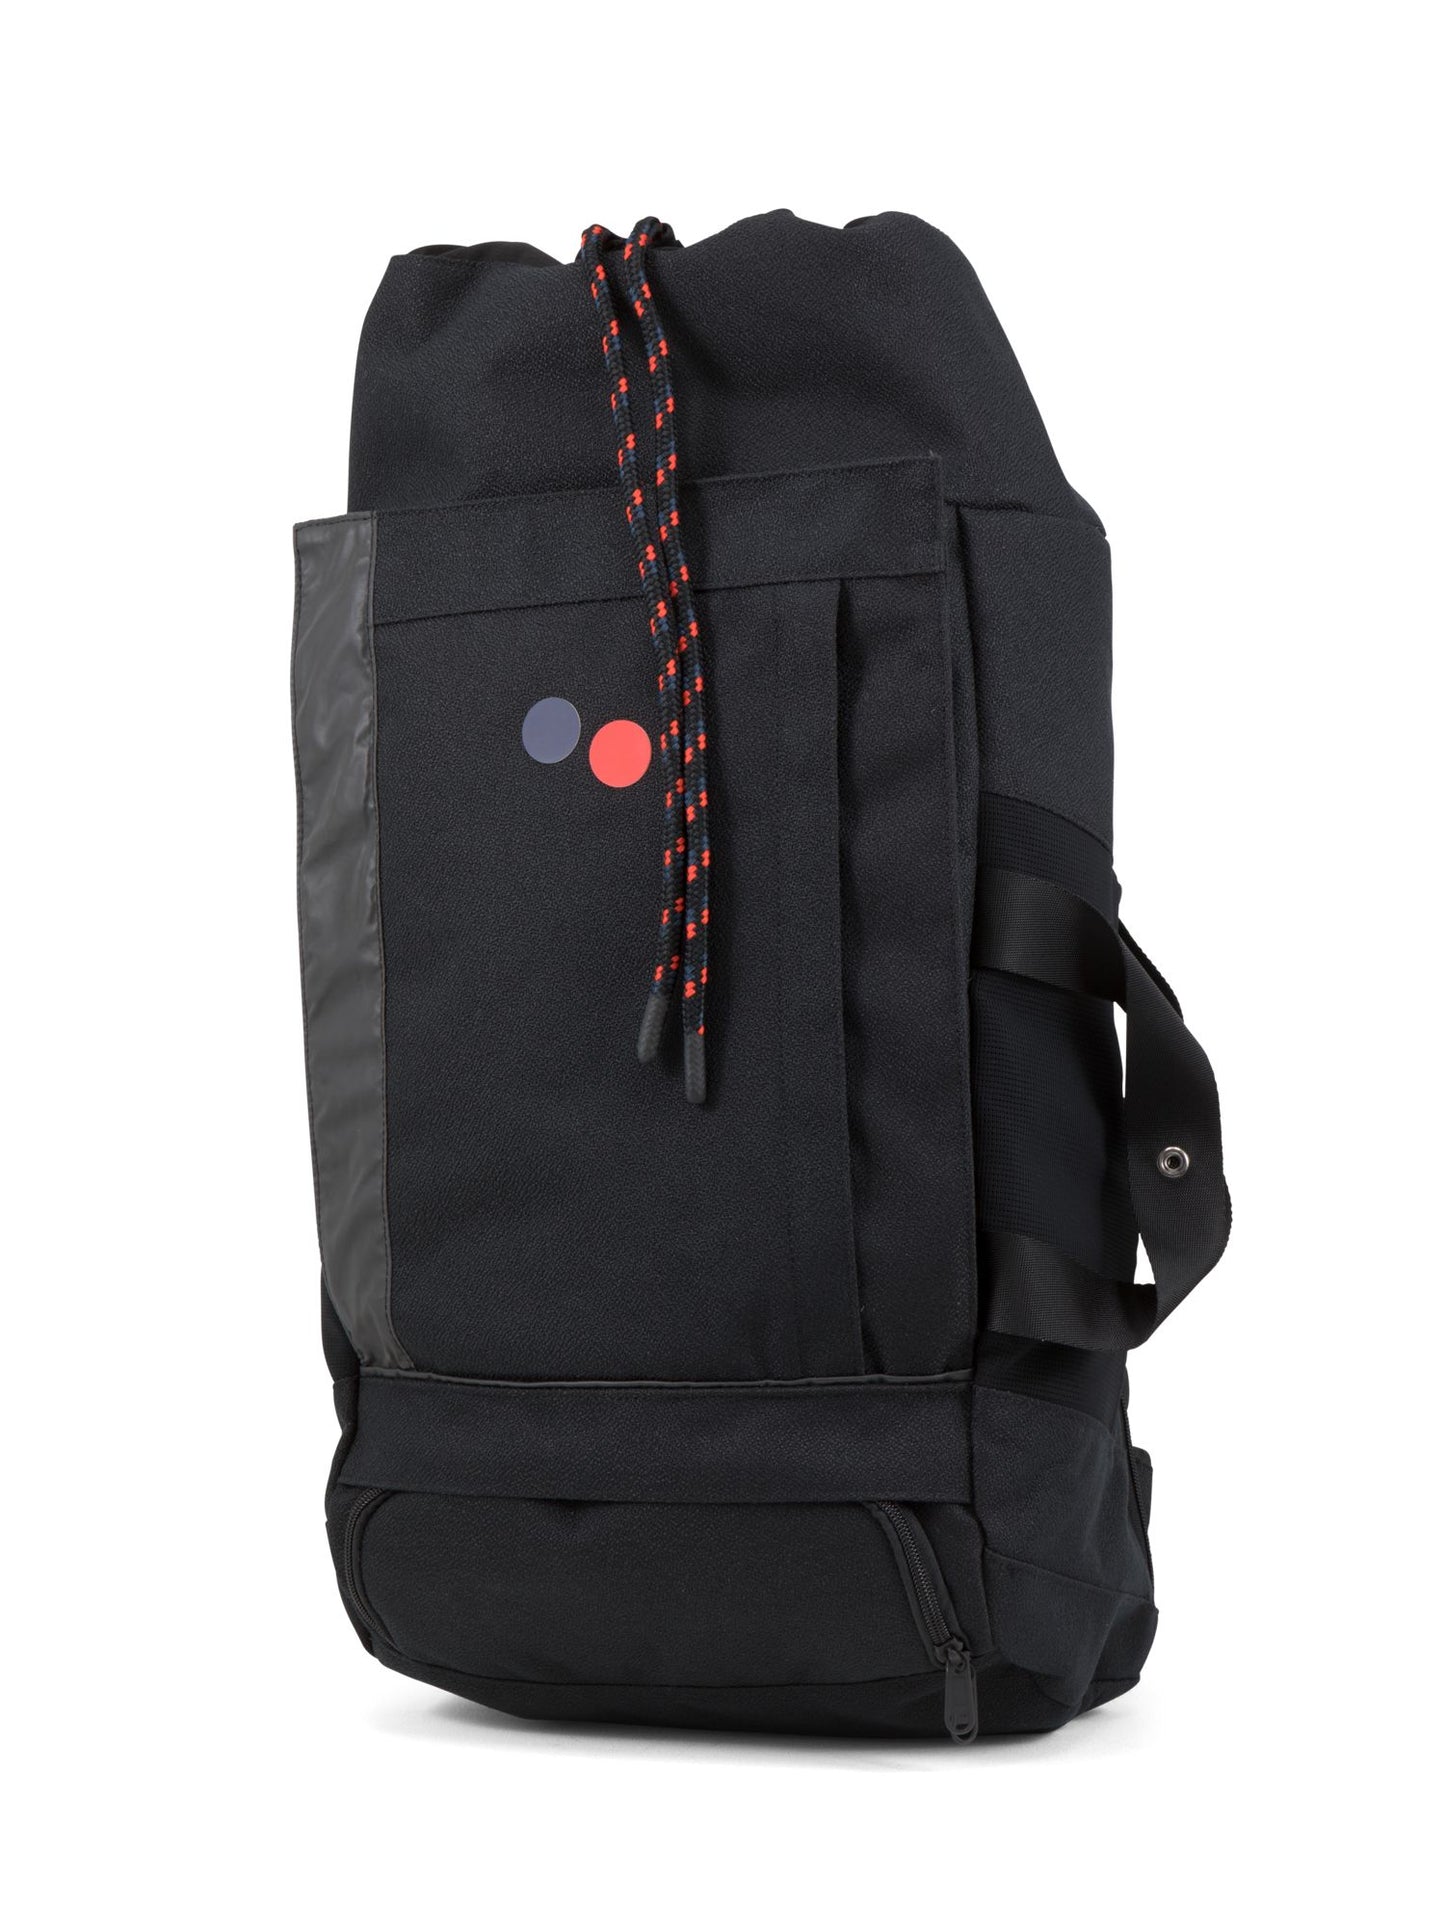 pinqponq-backpack-Blok-Large-Licorice-Black-front